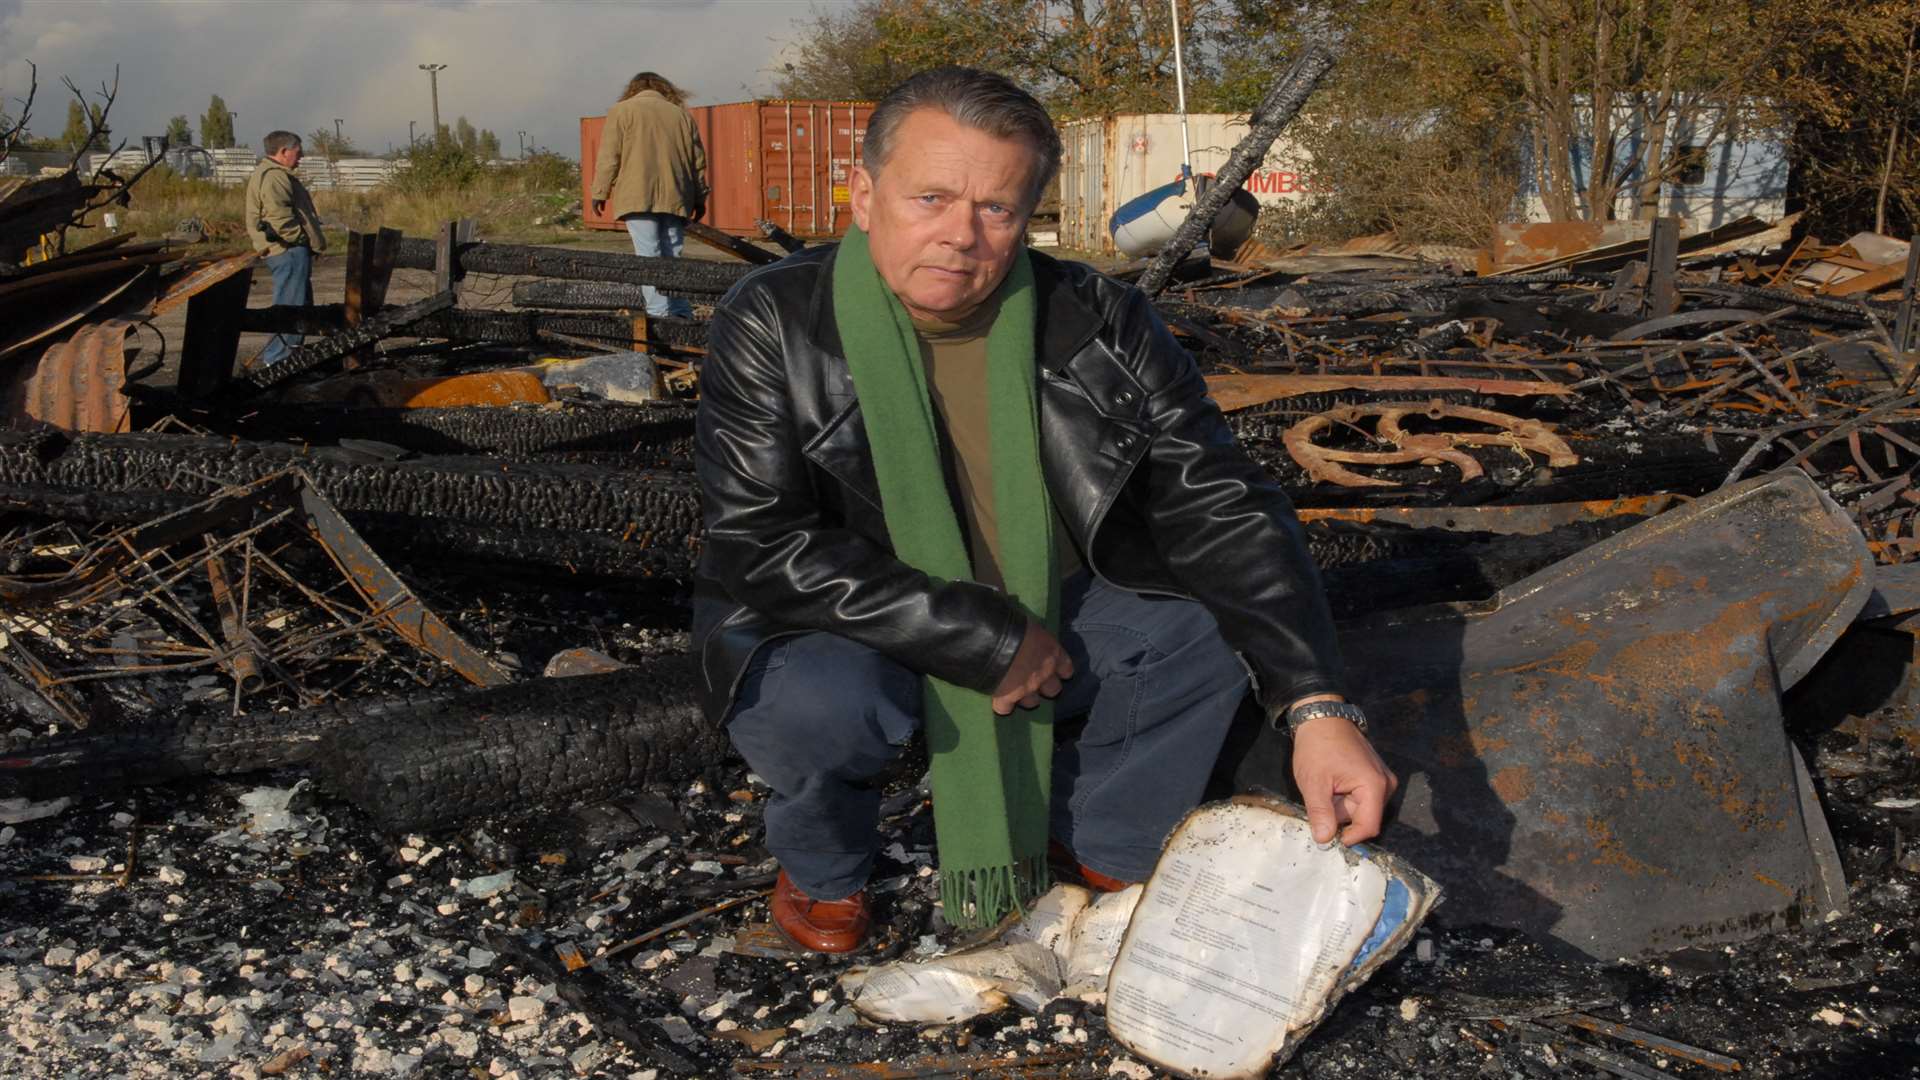 Chairman of Trustees Clive Reader among the remains after the fire in 2008